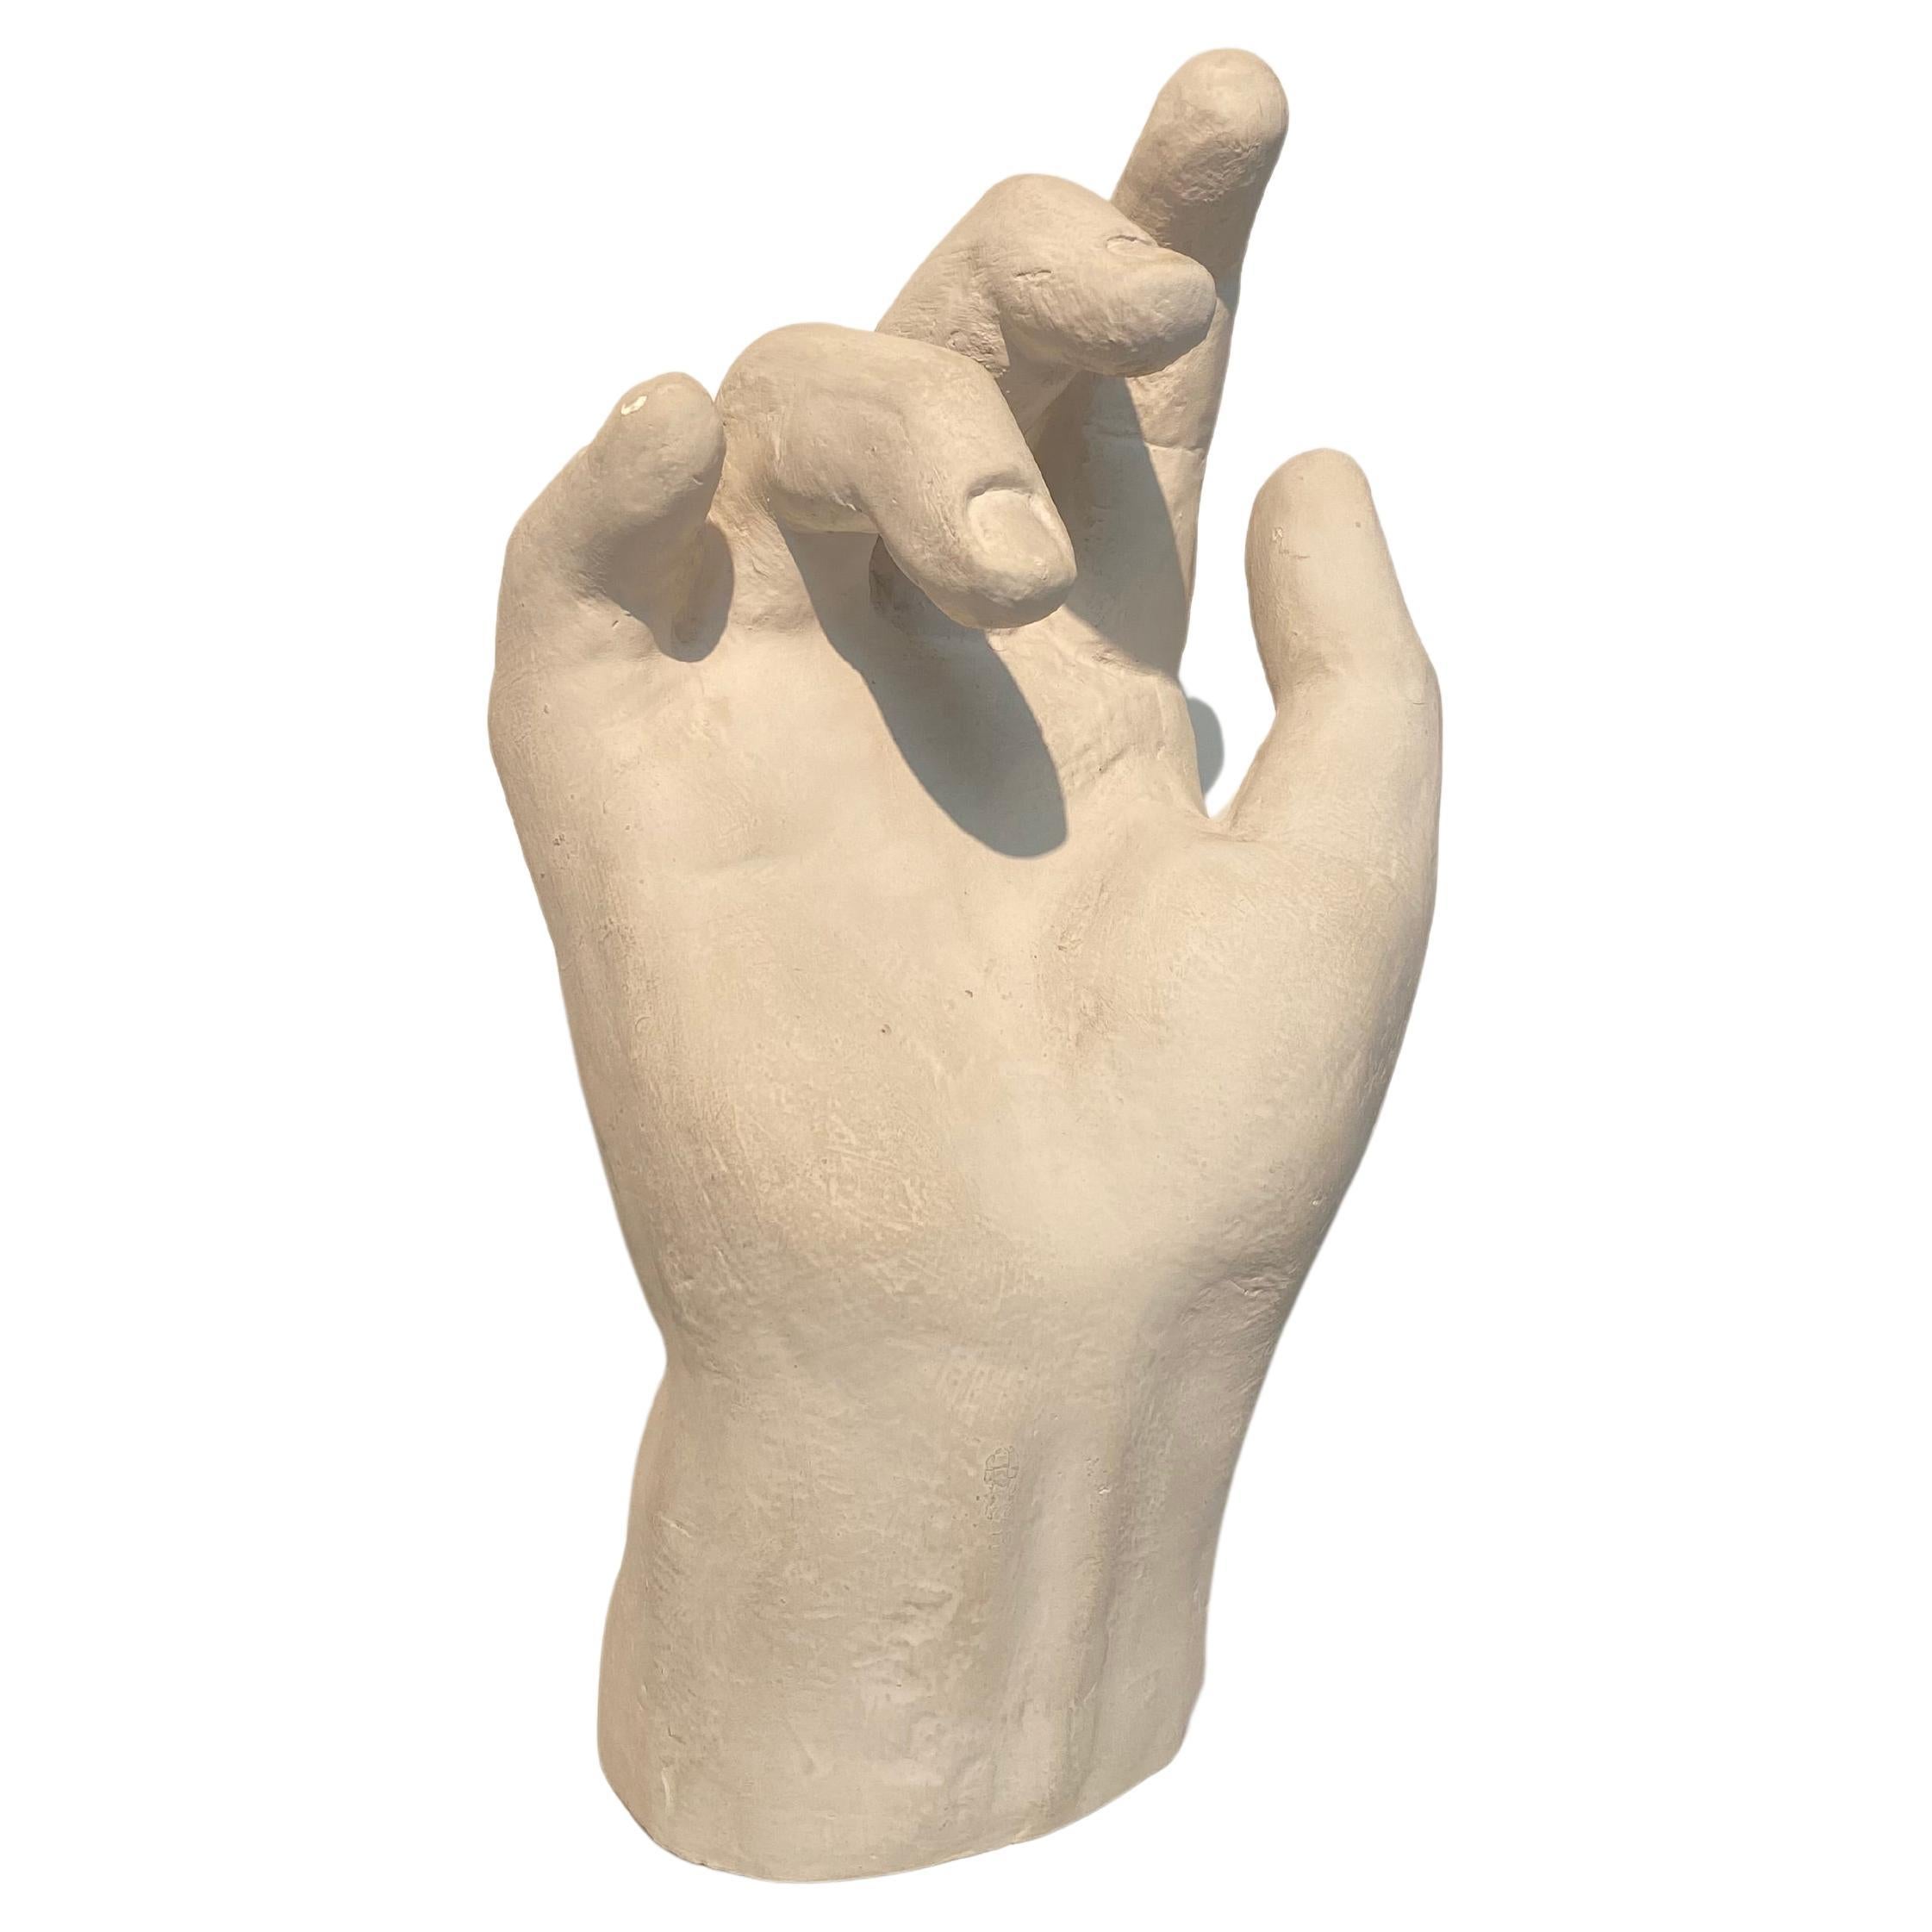 Contemporary Sculpture of a Hand For Sale